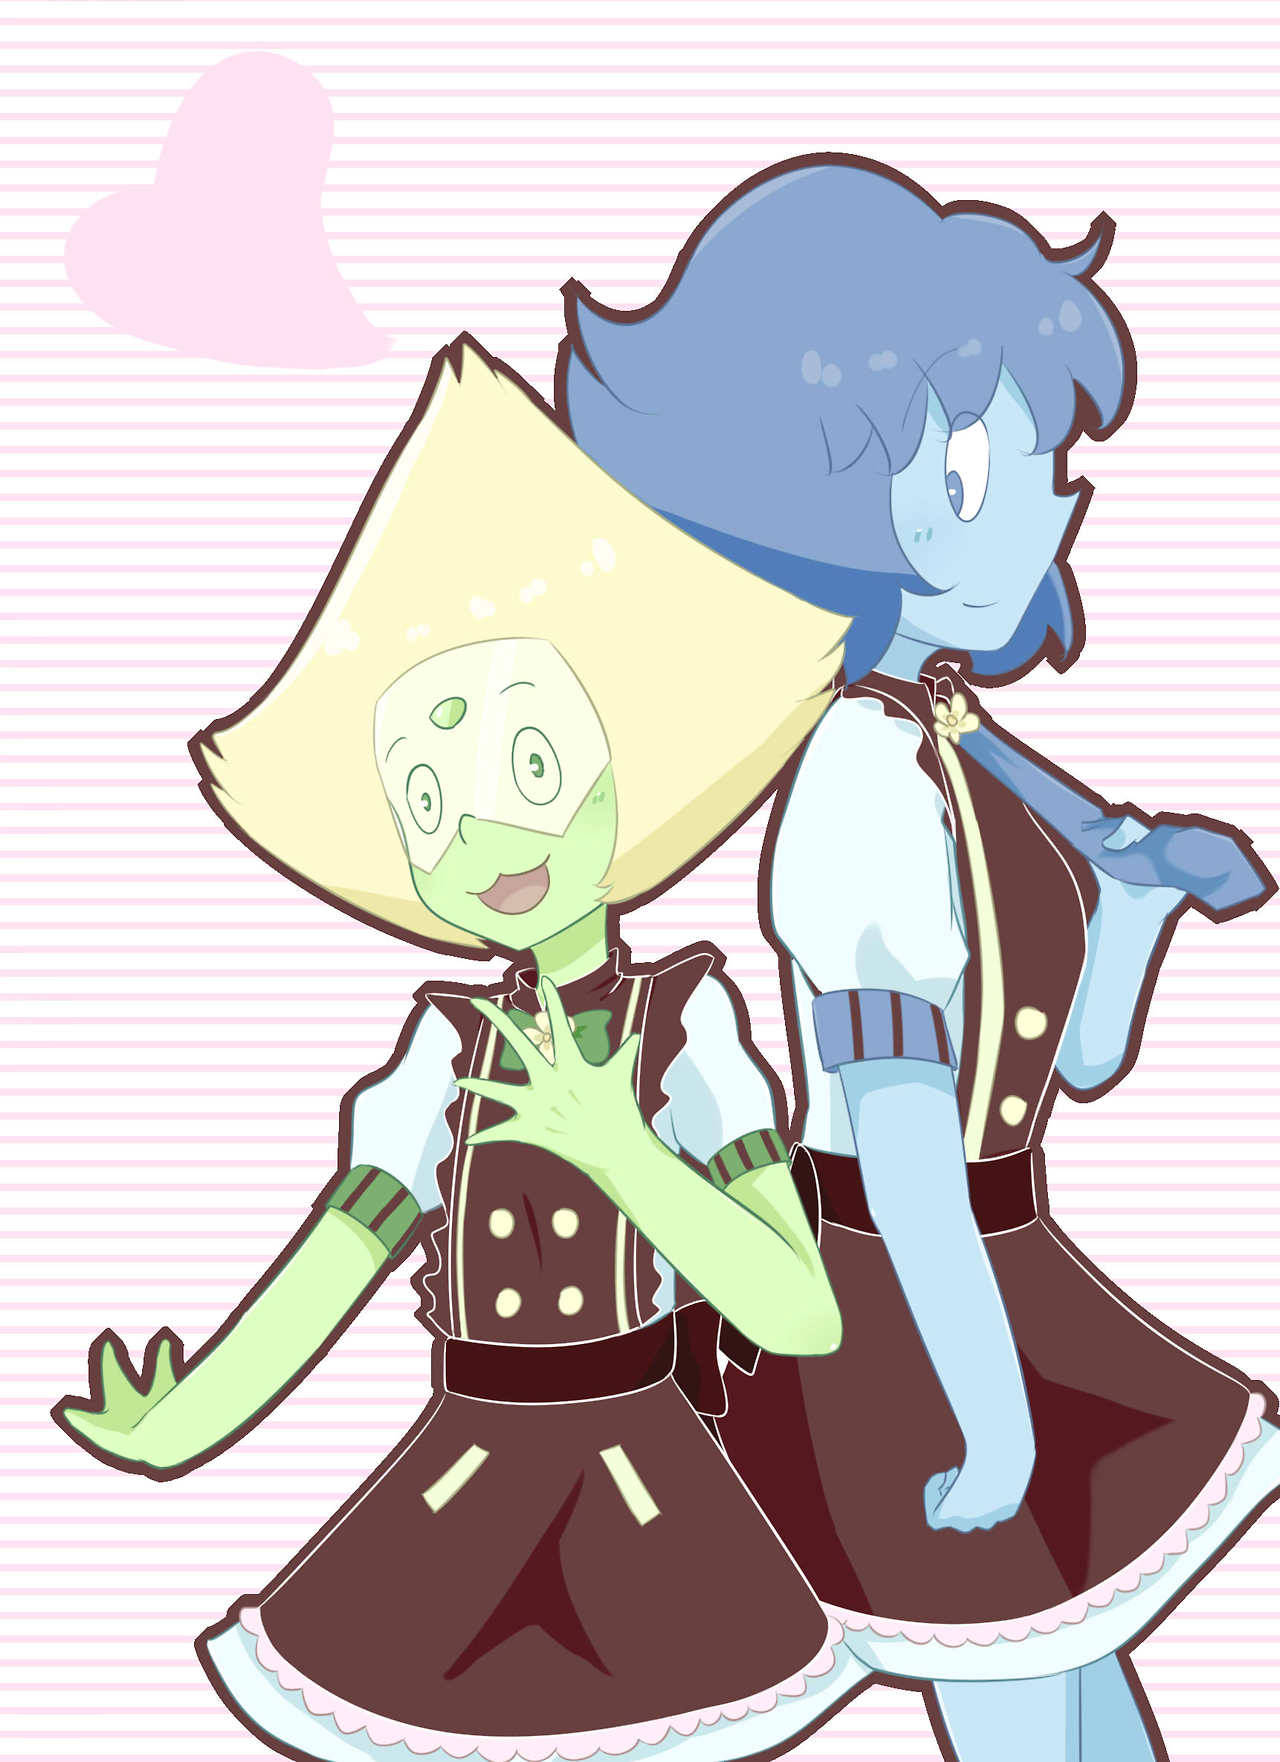 I draw this lapidot while watching this years’ precure. ……it was supposed to be white, but I changed the color｜ω・｀)